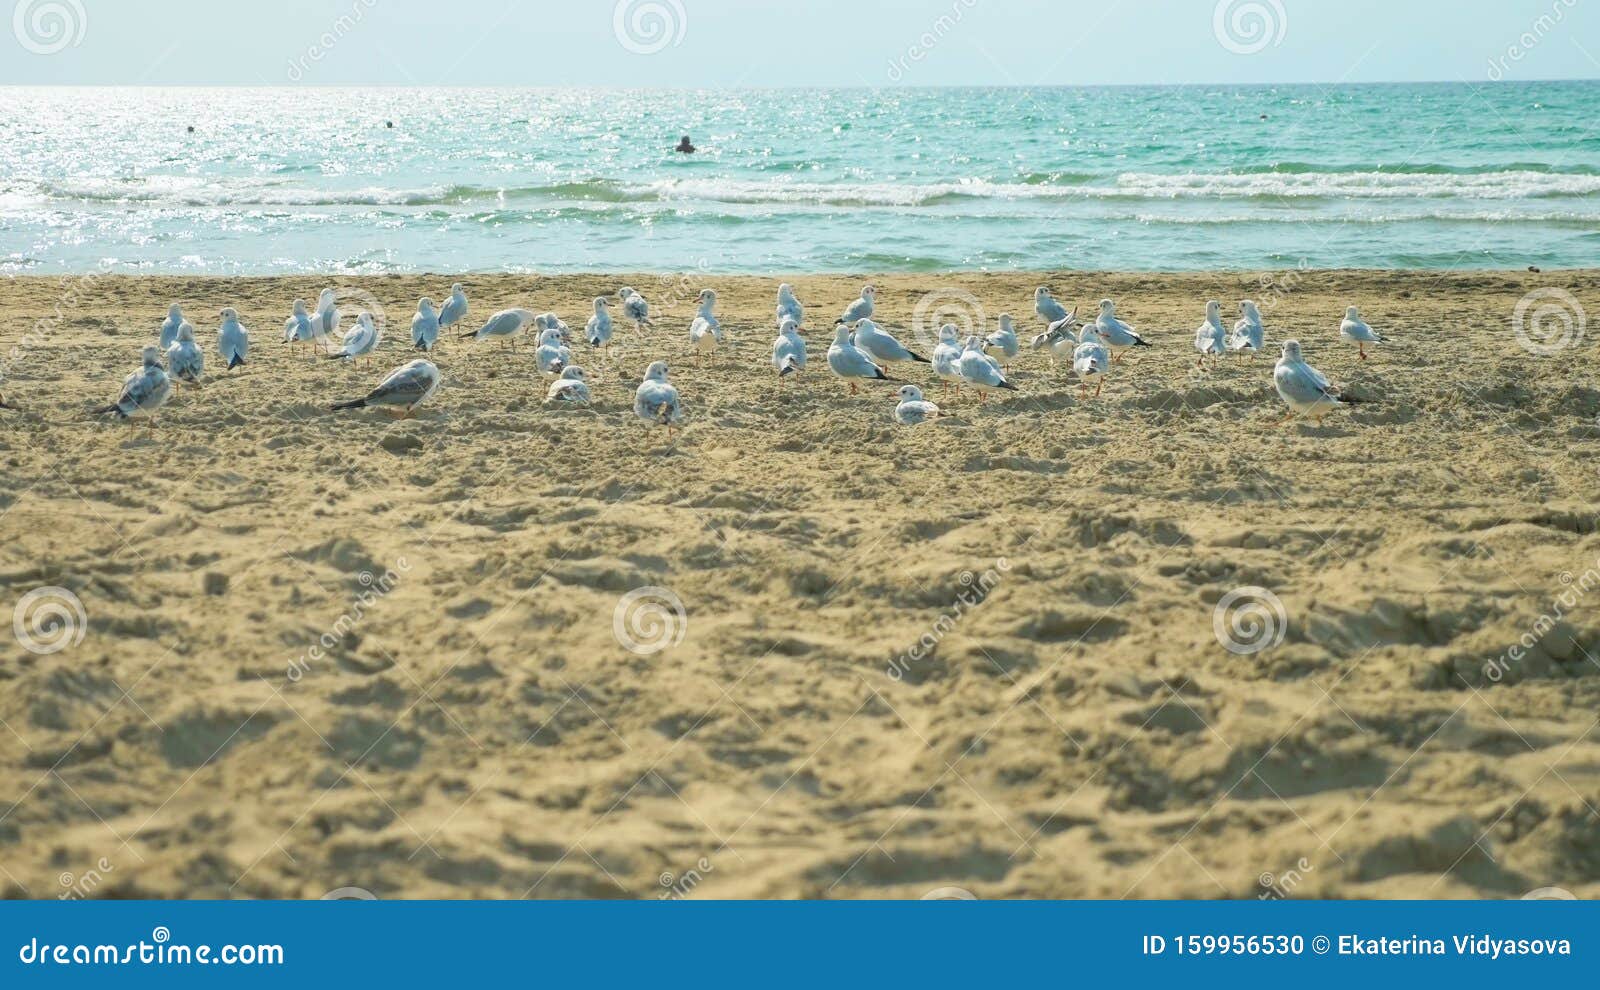 moron guy accelerates a flock of seagulls on a sandy beach by the sea